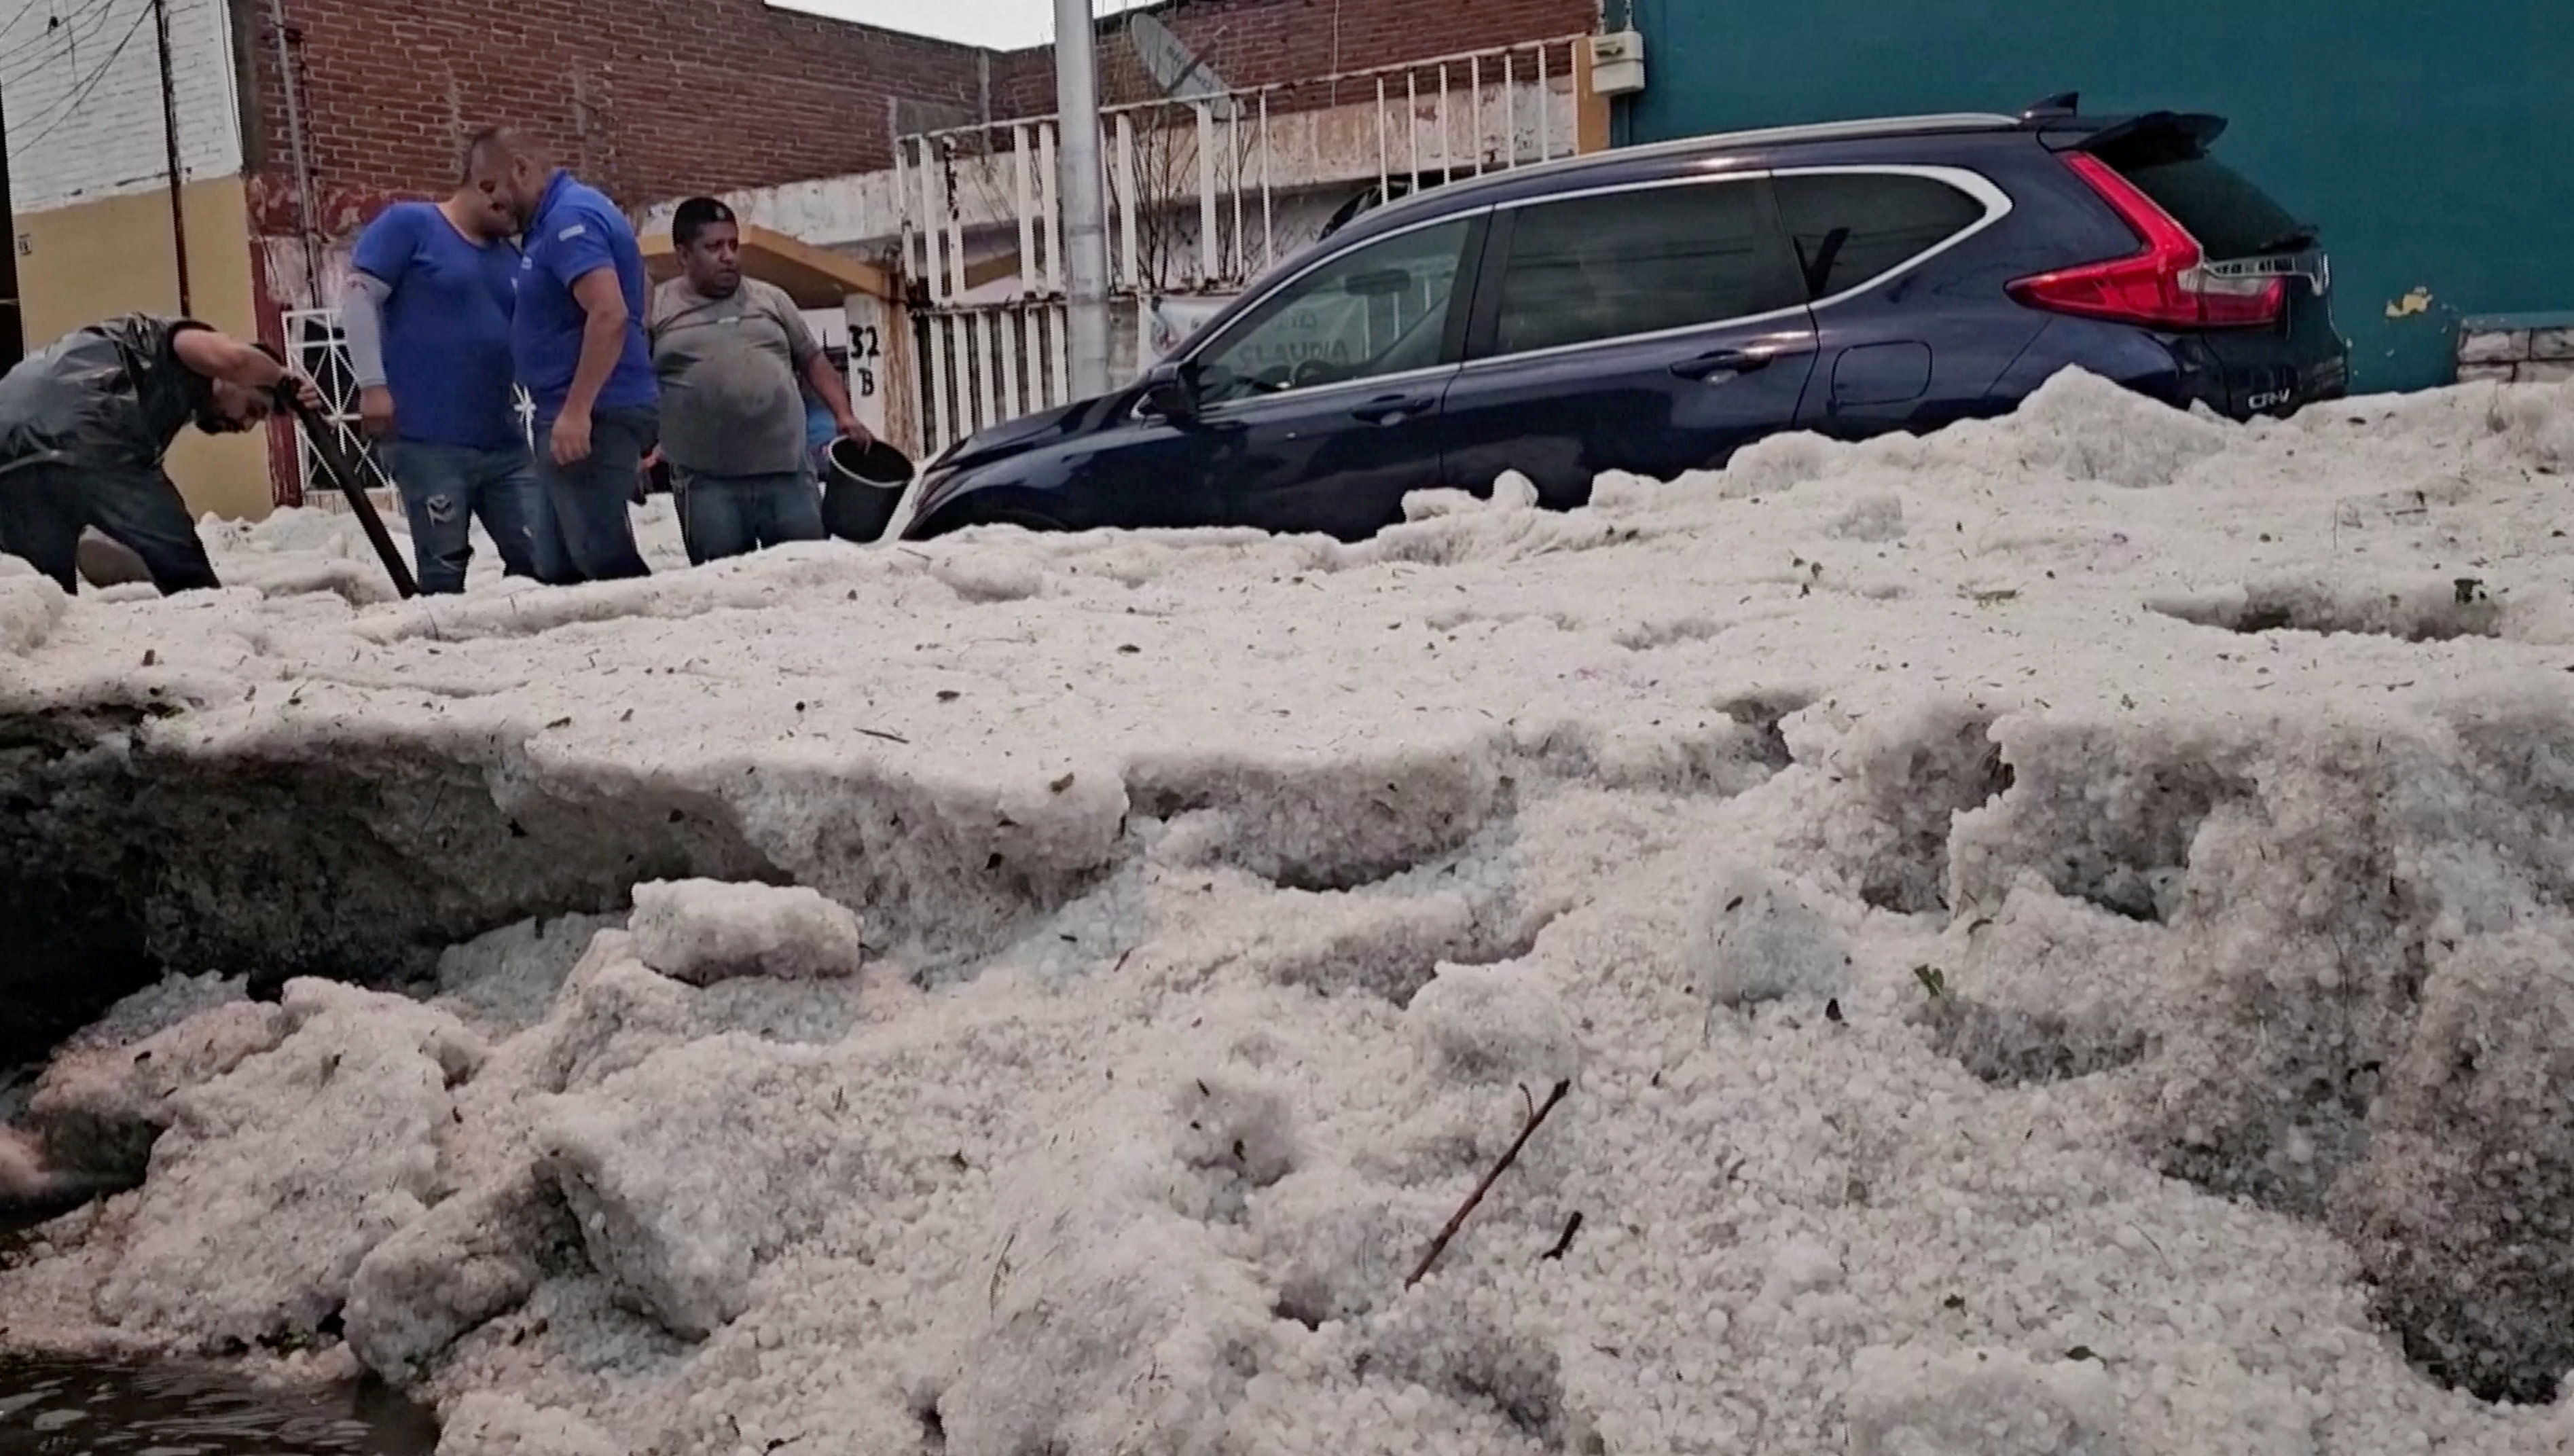 Hailstorm covers Mexican streets with thick ice amid heat wave